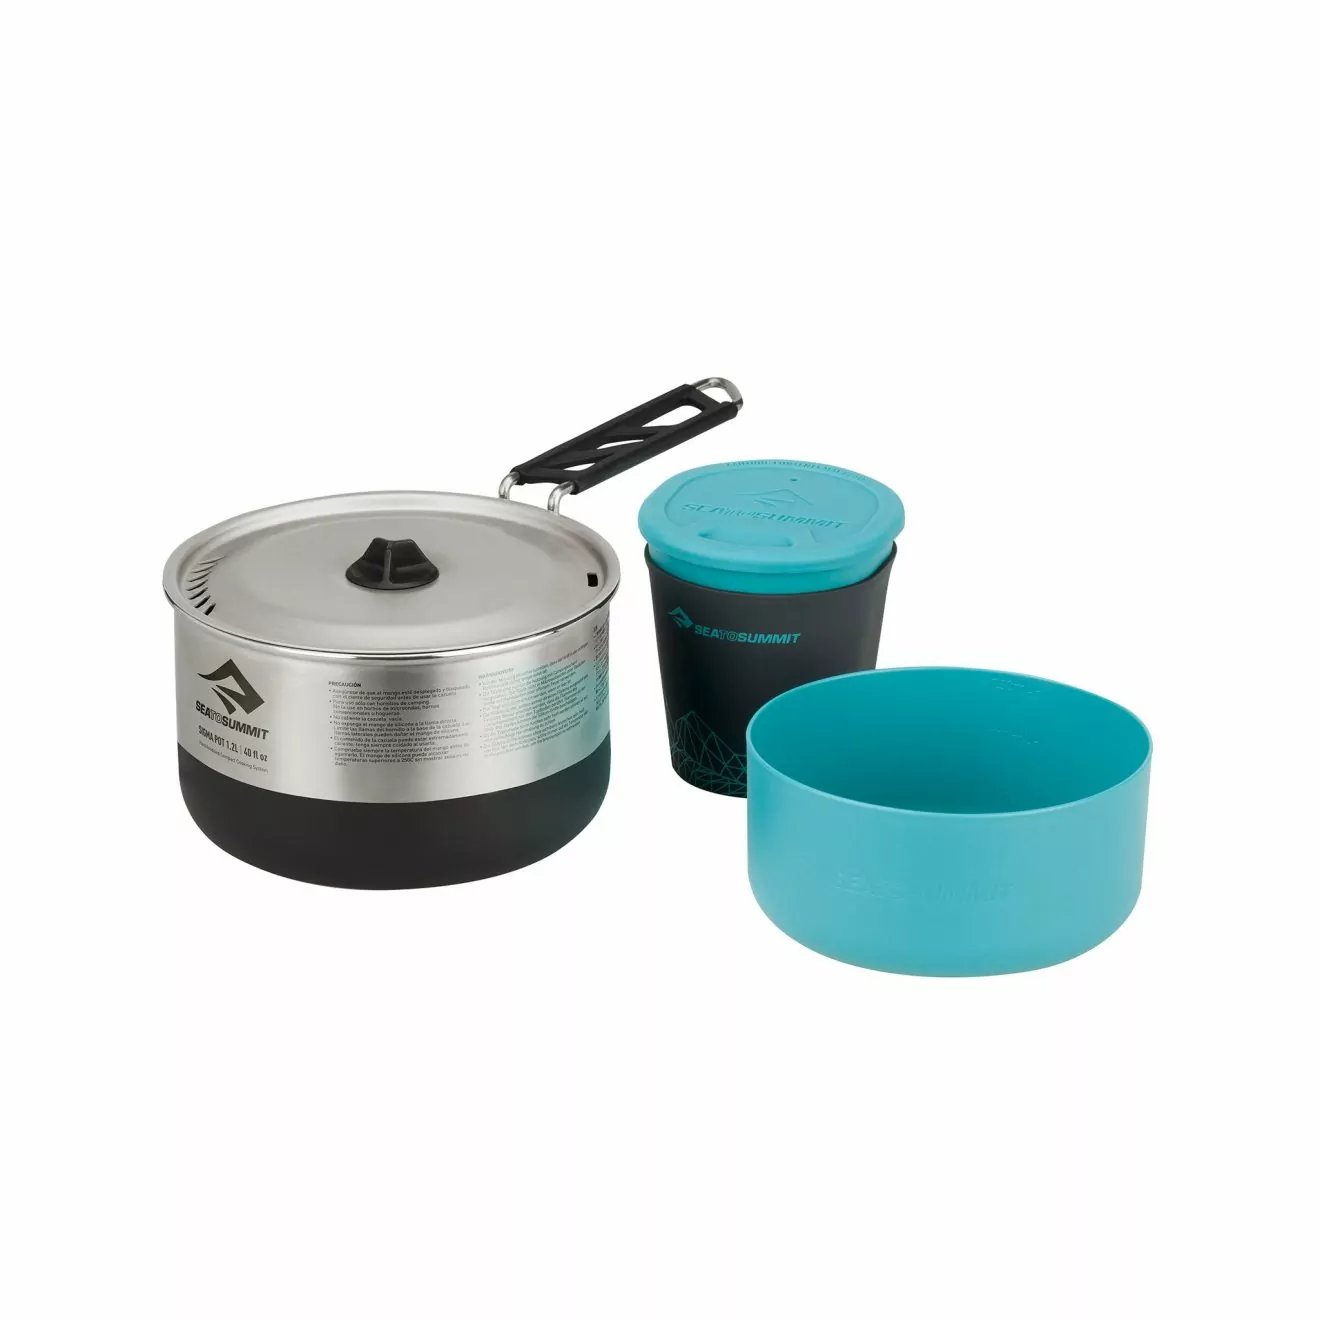 A druable cook set for backpacking from Sea to Summit. Consists of a pot, a bowl, and a mug.